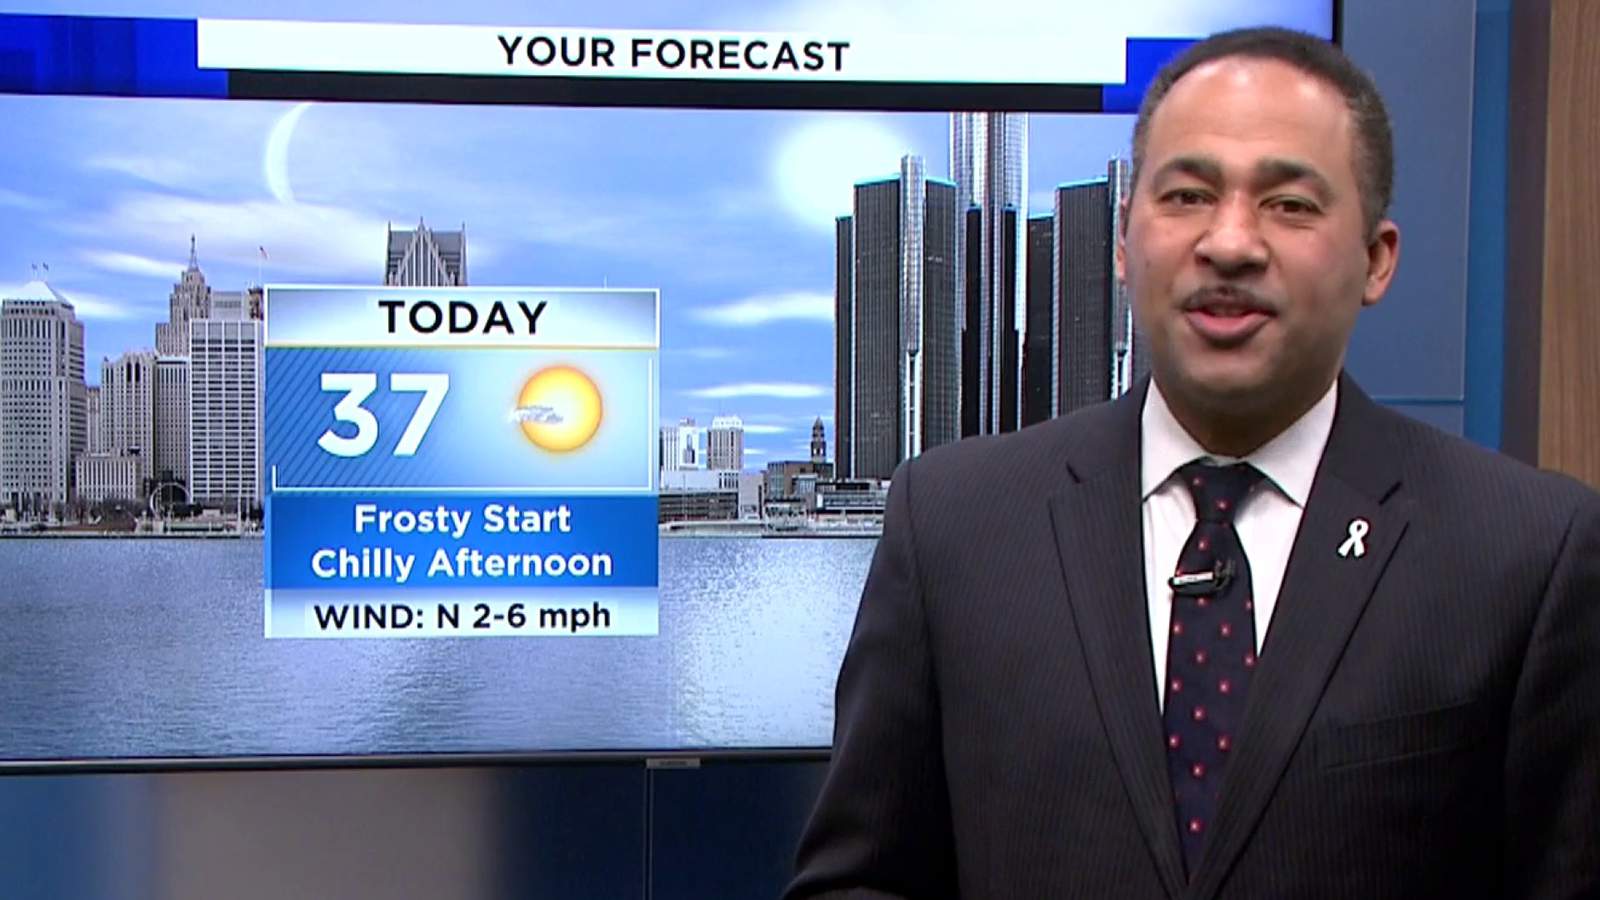 Metro Detroit weather: Chilly afternoon after a frosty start